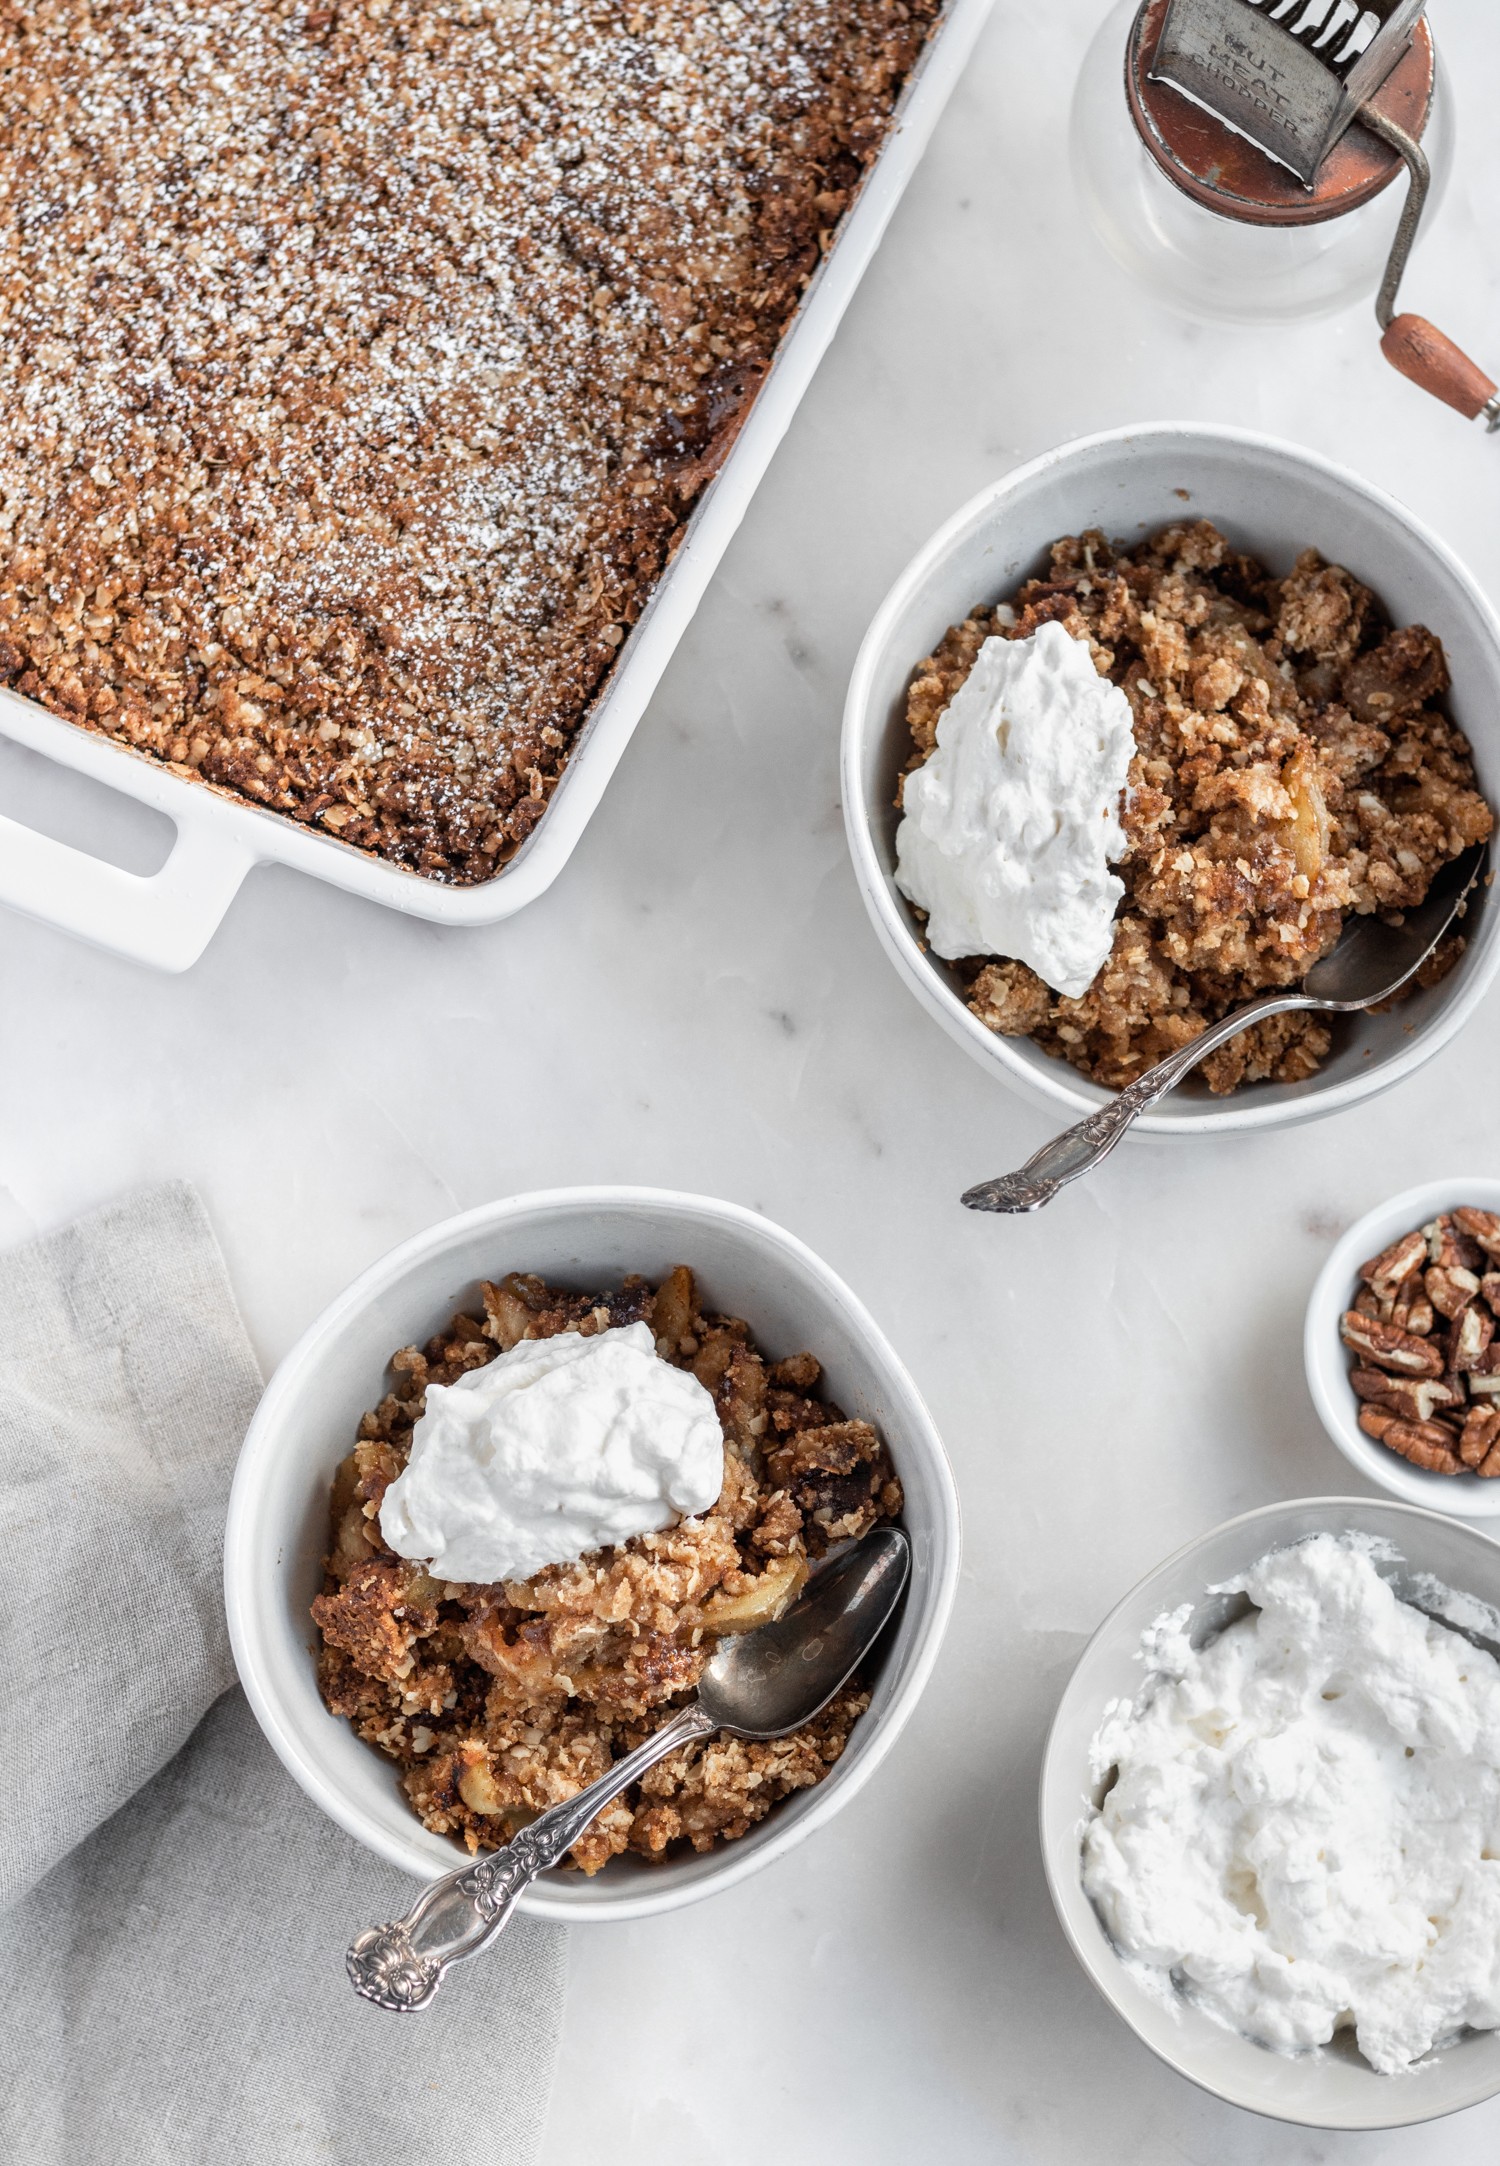 Apple crisp with Irish whiskey and a gluten free oat topping.